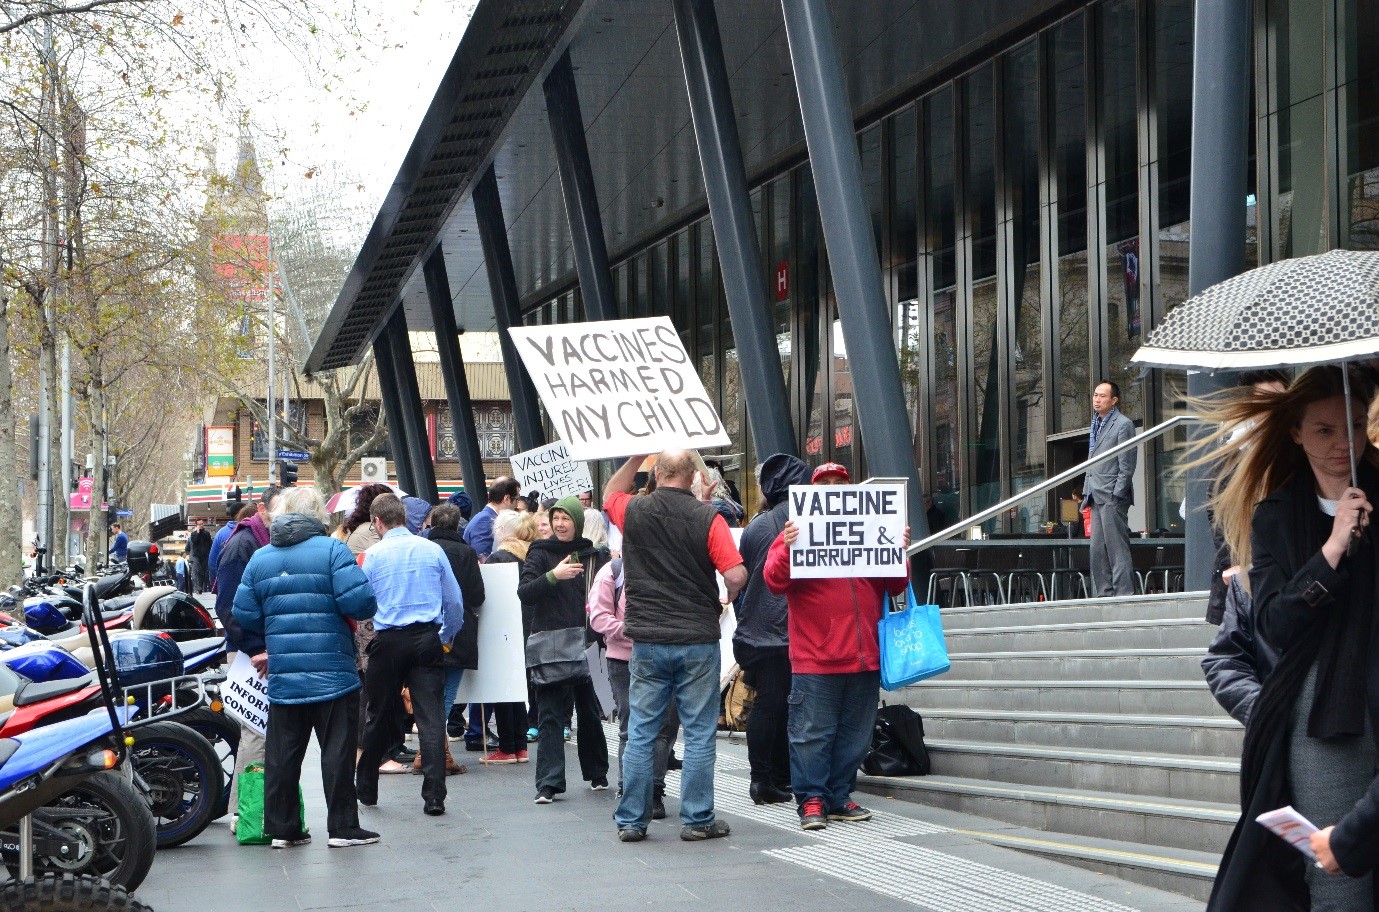 Figure 1 "Crazy anti-vaxxers protesting outside 111 Bourke Street, Melbourne" by Alpha, 2017